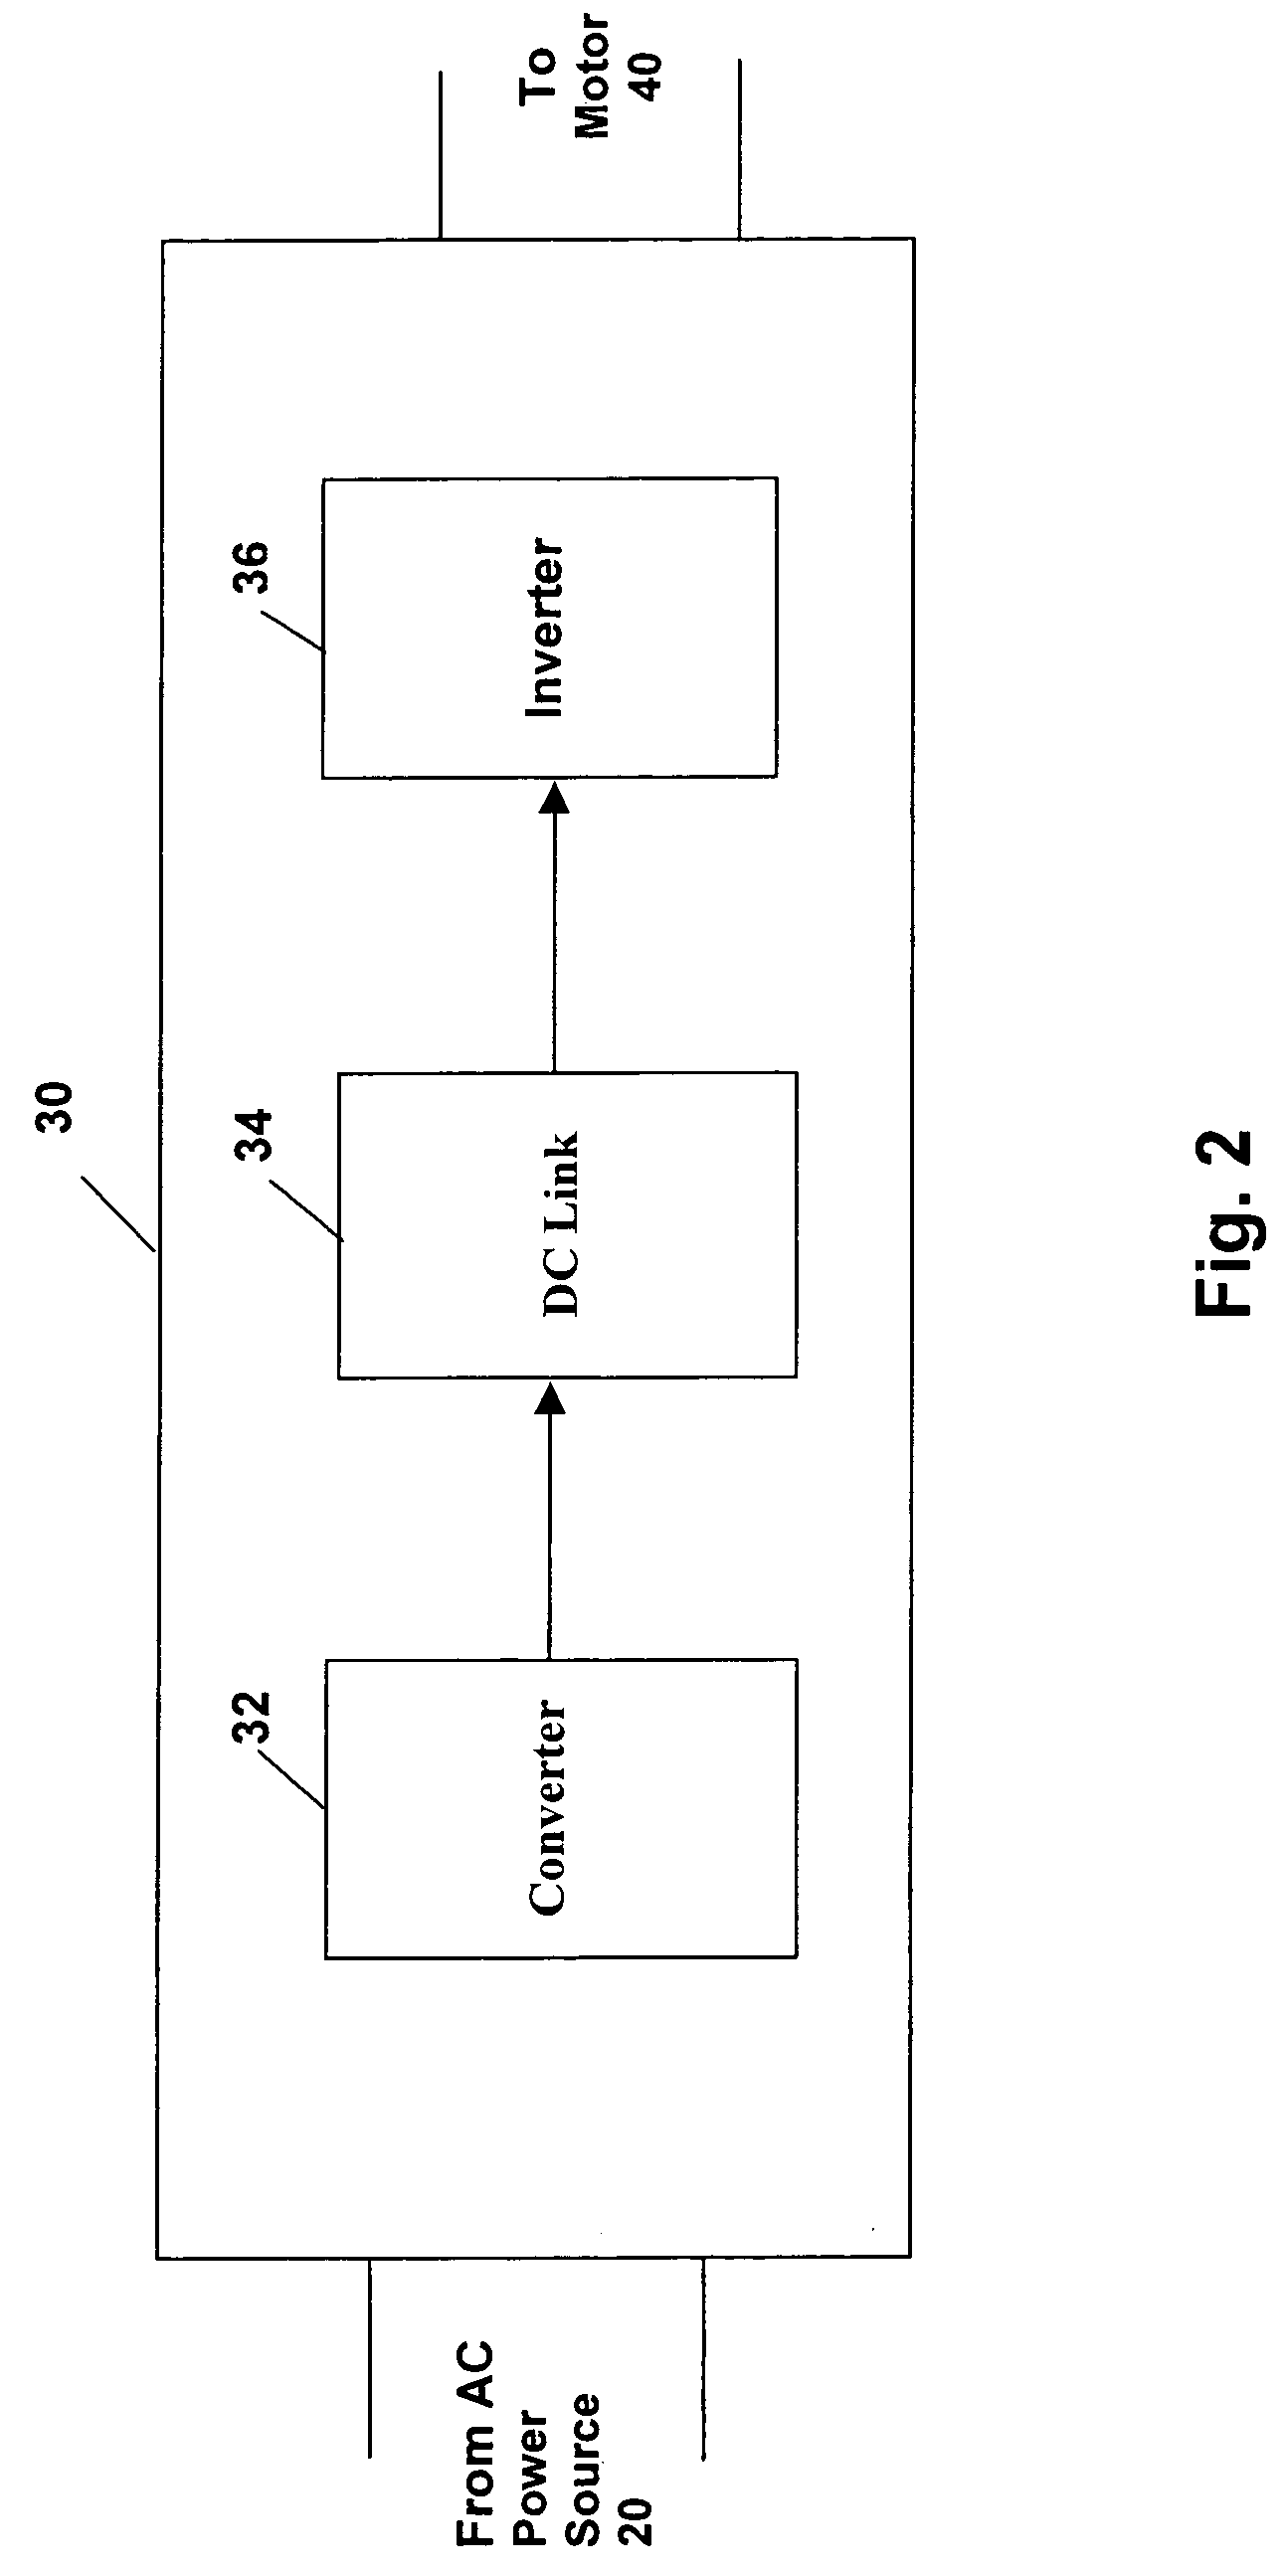 Electronic component cooling system for an air-cooled chiller